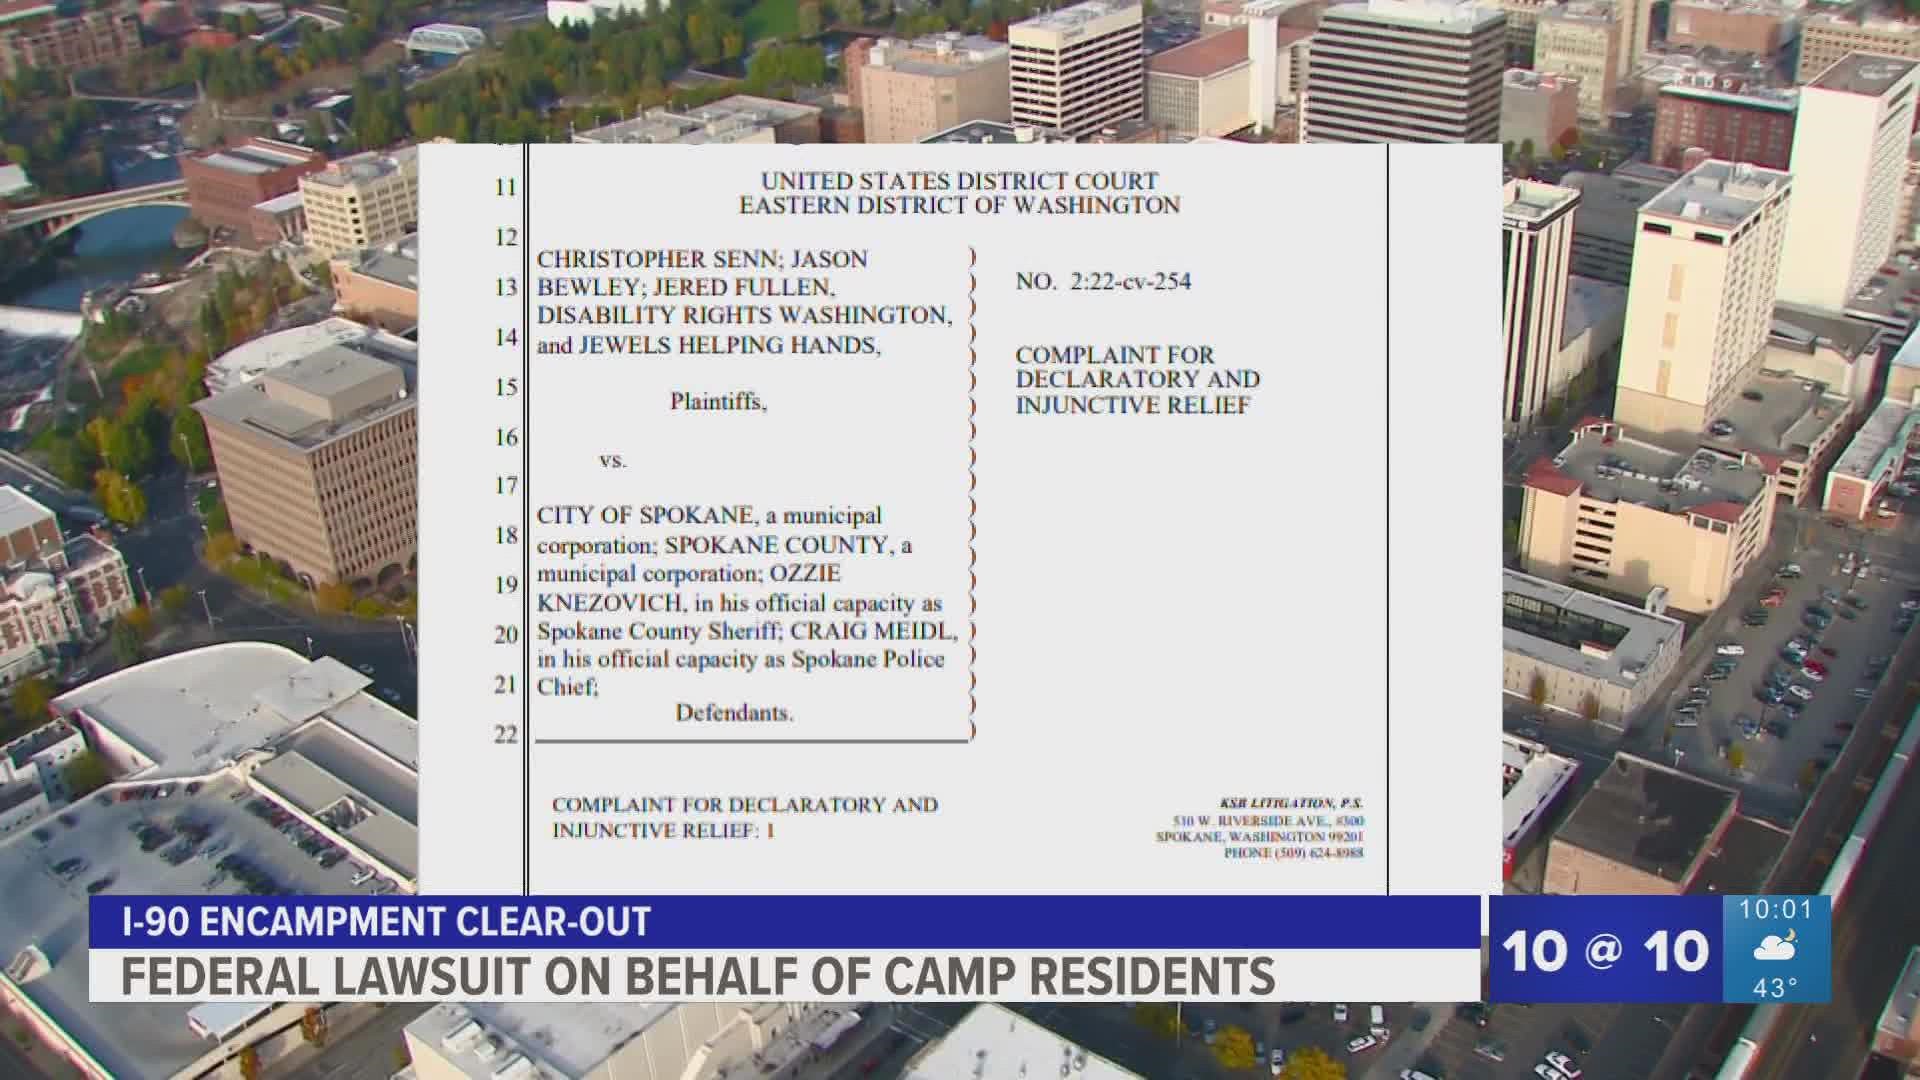 The complaint, filed on behalf of campers, Jewels Helping Hands and Disability Rights Washington, says such action from local authorities is unconstitutional.